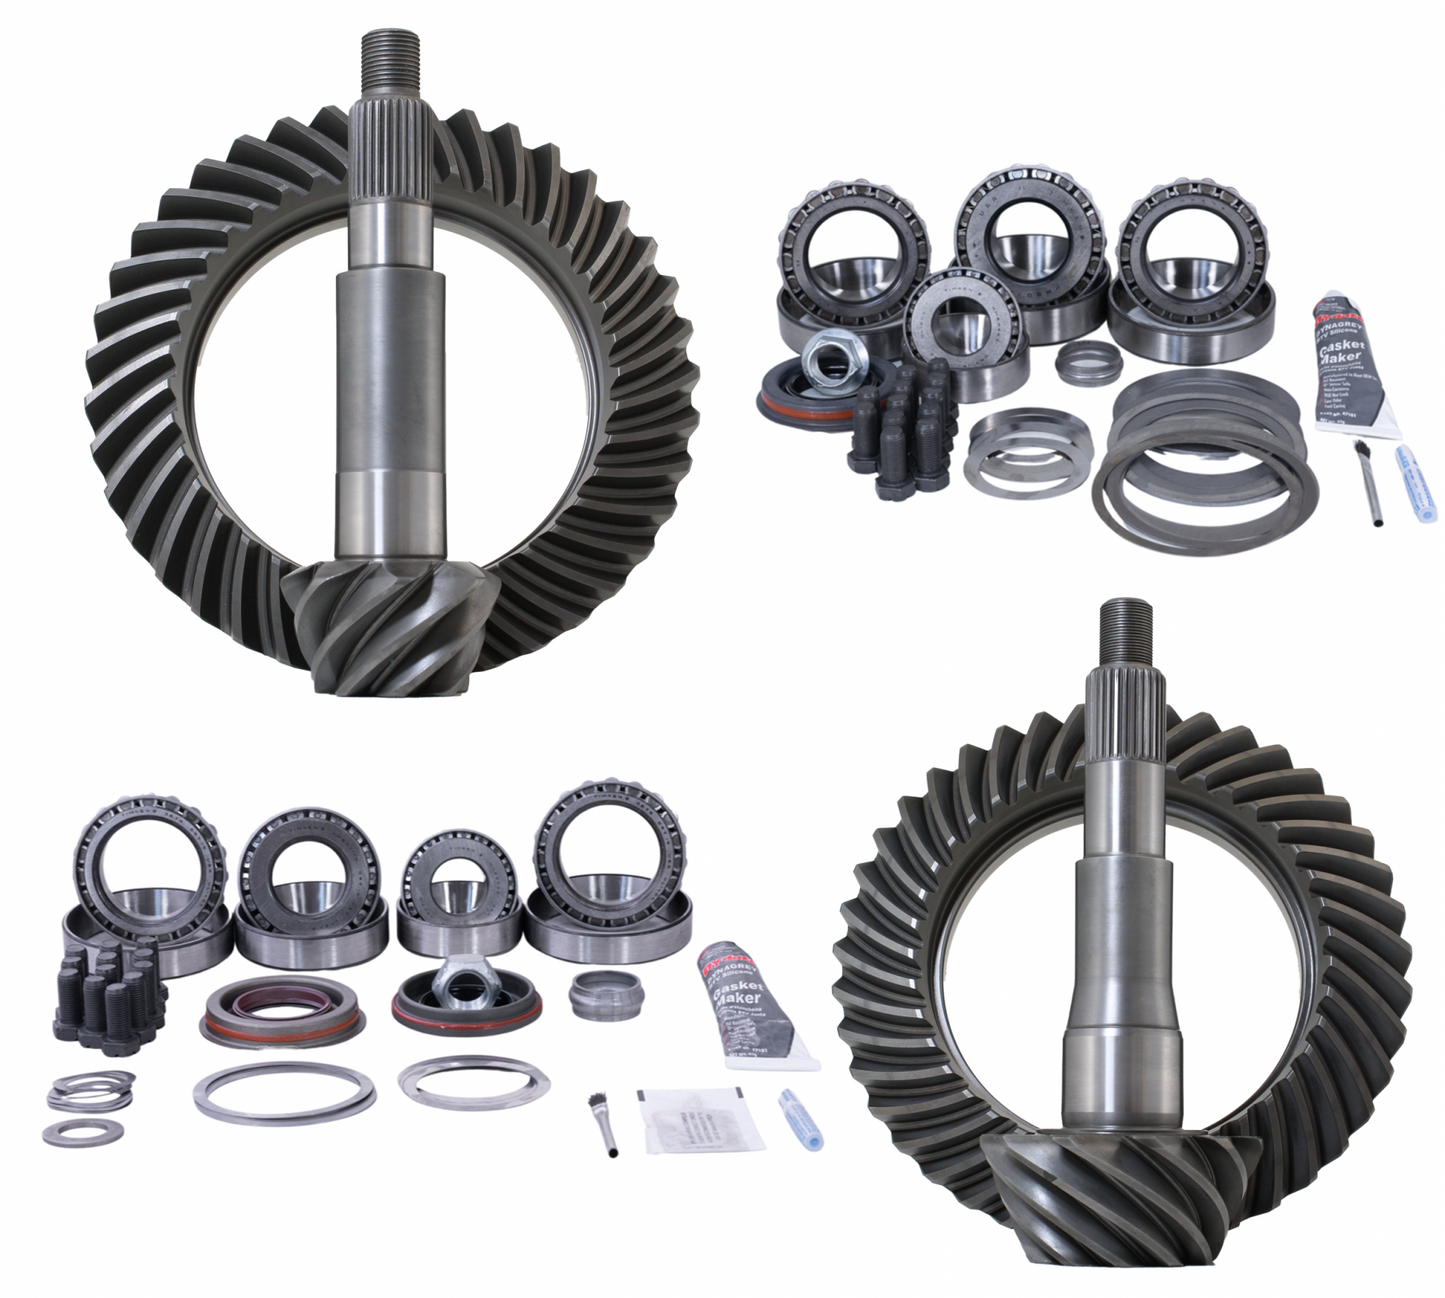 2009 and Up Chevy 1500 (GM8.6-GM8.25R) 5.13 Ratio Gear Package Revolution Gear and Axle